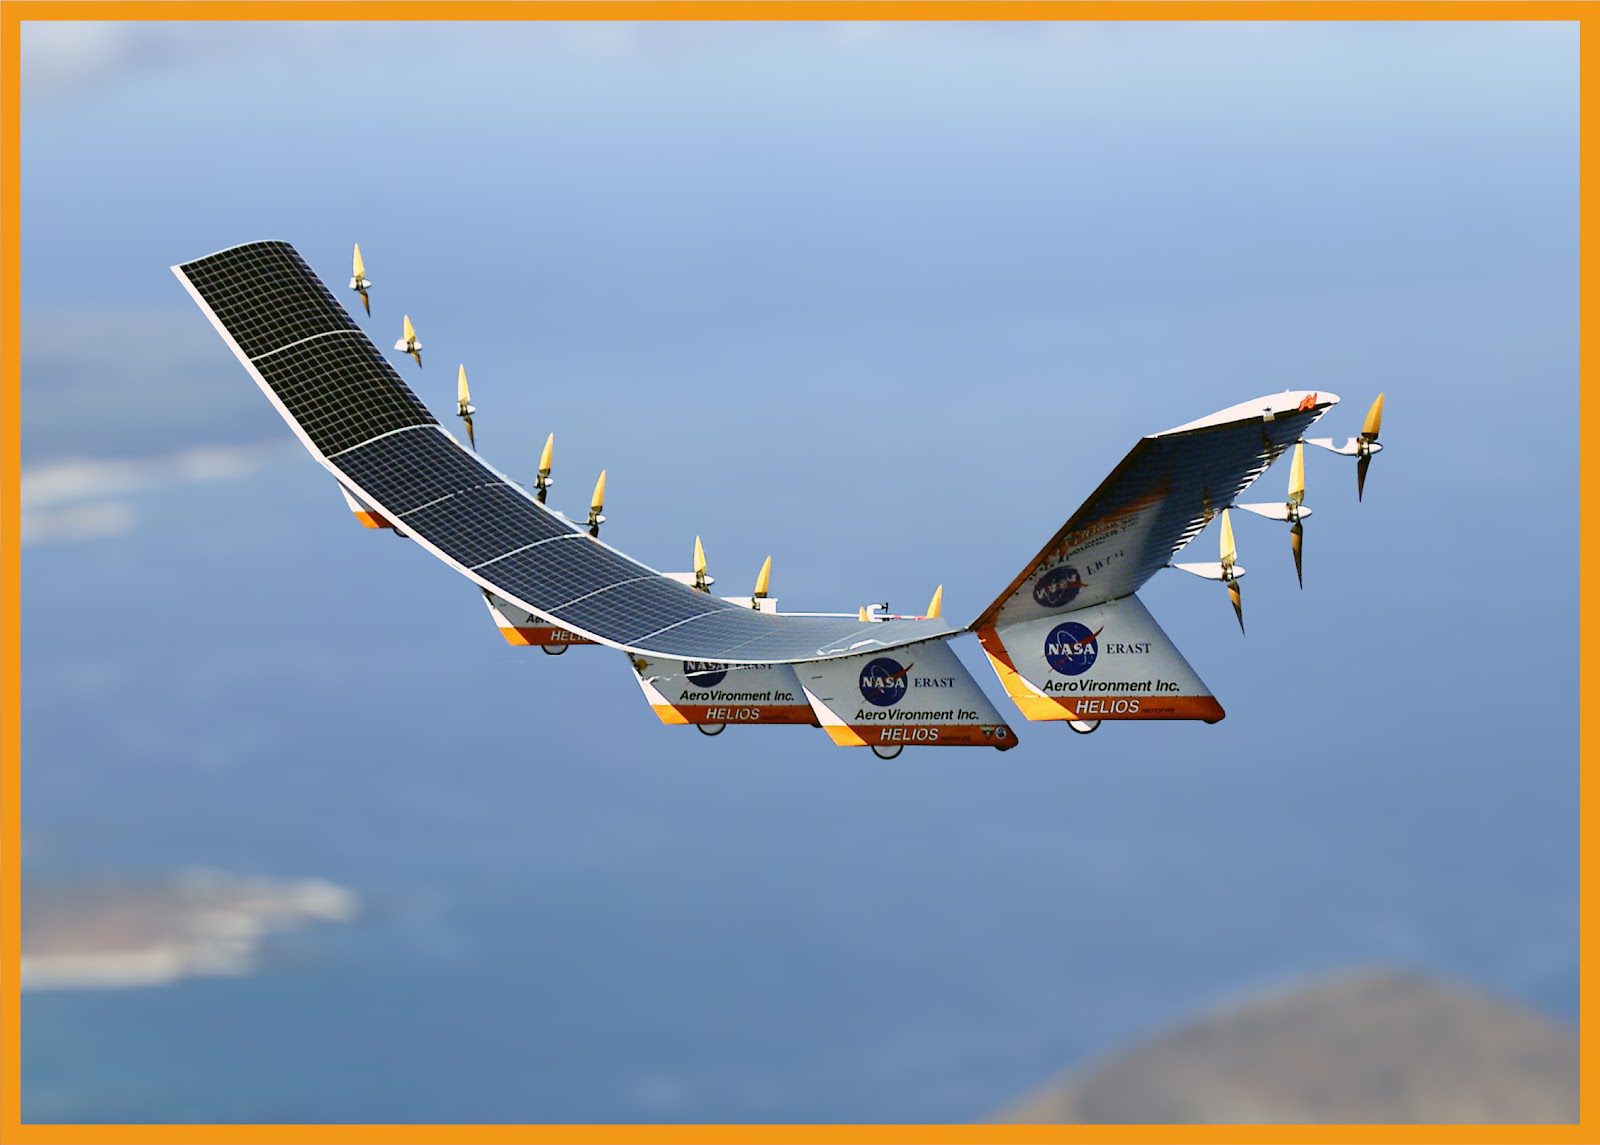 NASA prototype solar powered long duration drone Helios. Weight savings are very important for aerial electric vehicles. This means that integration of lightweight flexible perovskite solar technology is of great interest to projects such as this.